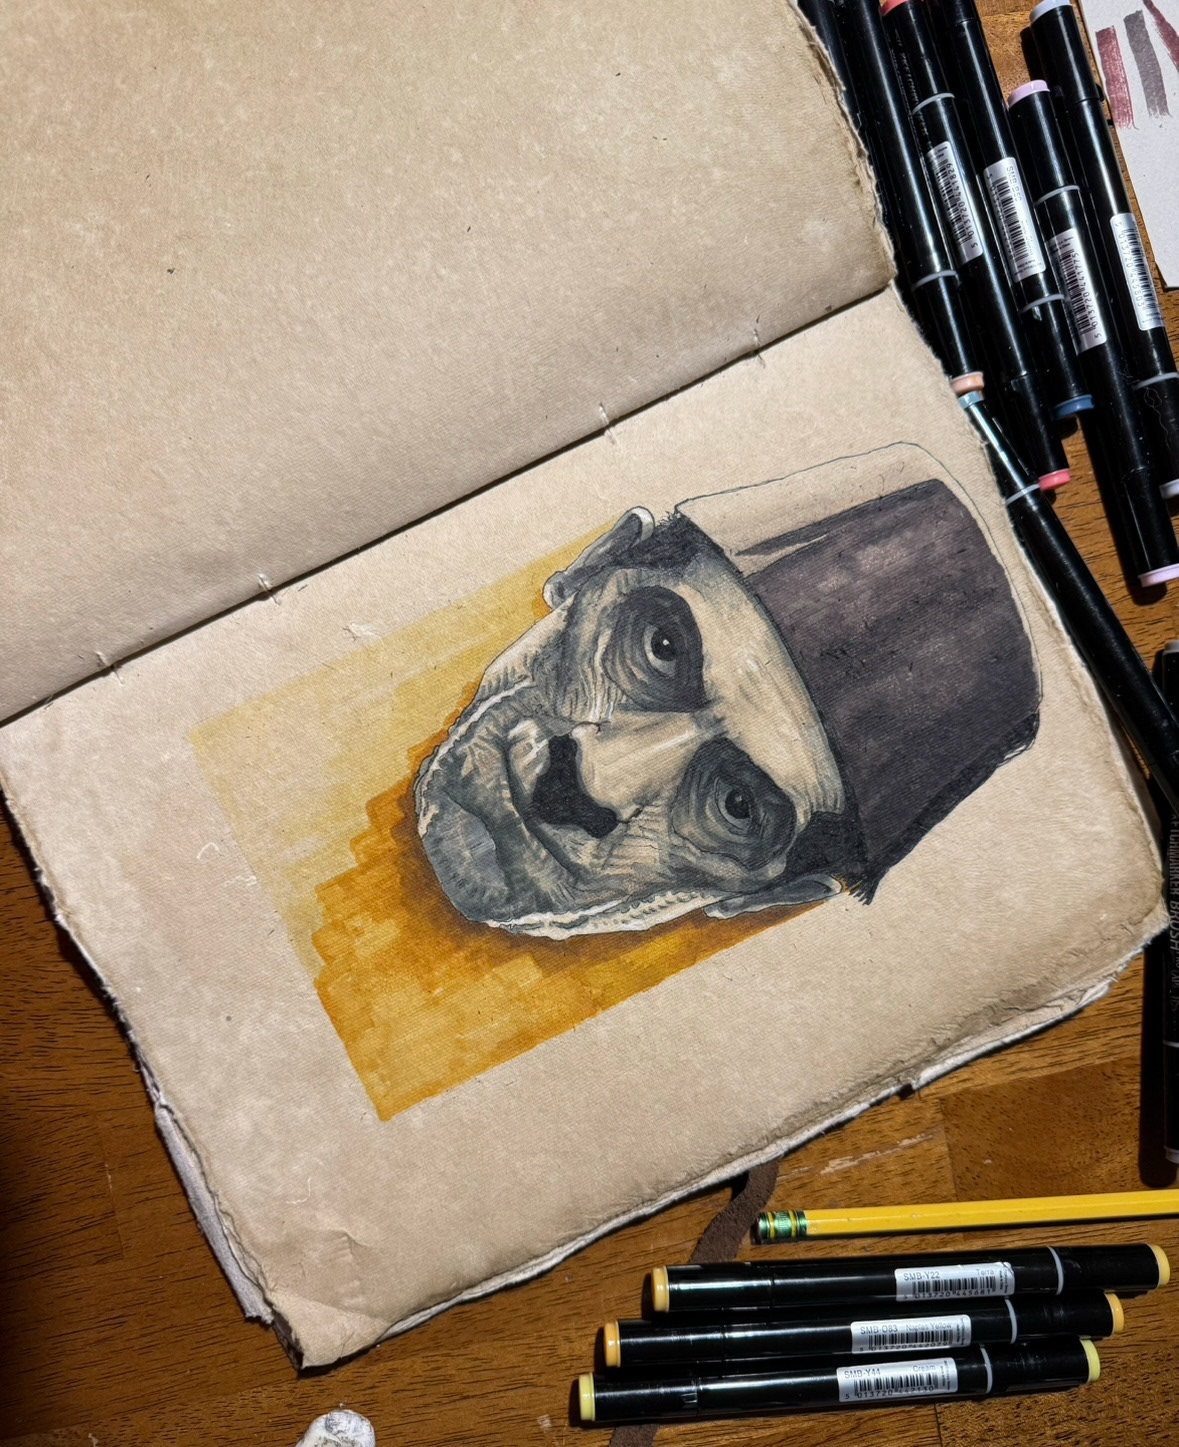 painting   The Mummy markers sketch